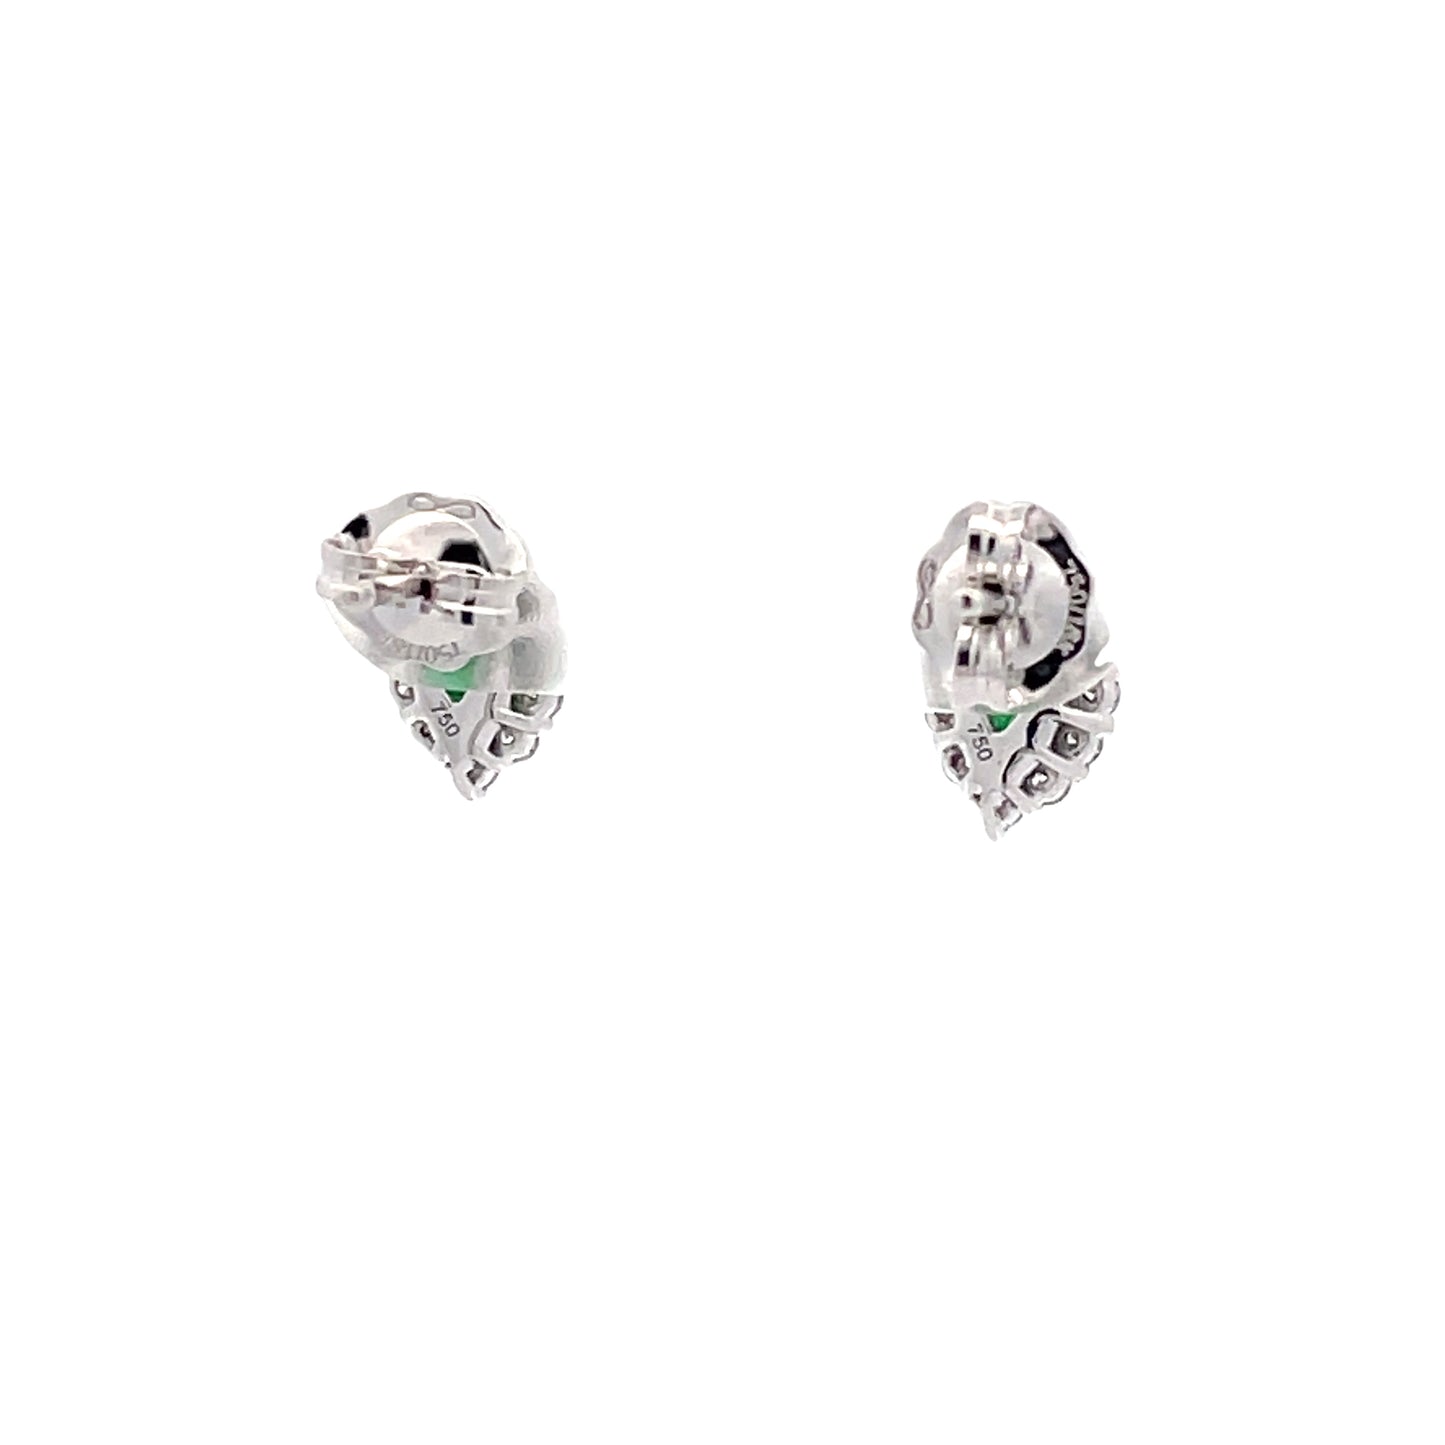 Emerald and Diamond Cluster Style Earrings  Gardiner Brothers   